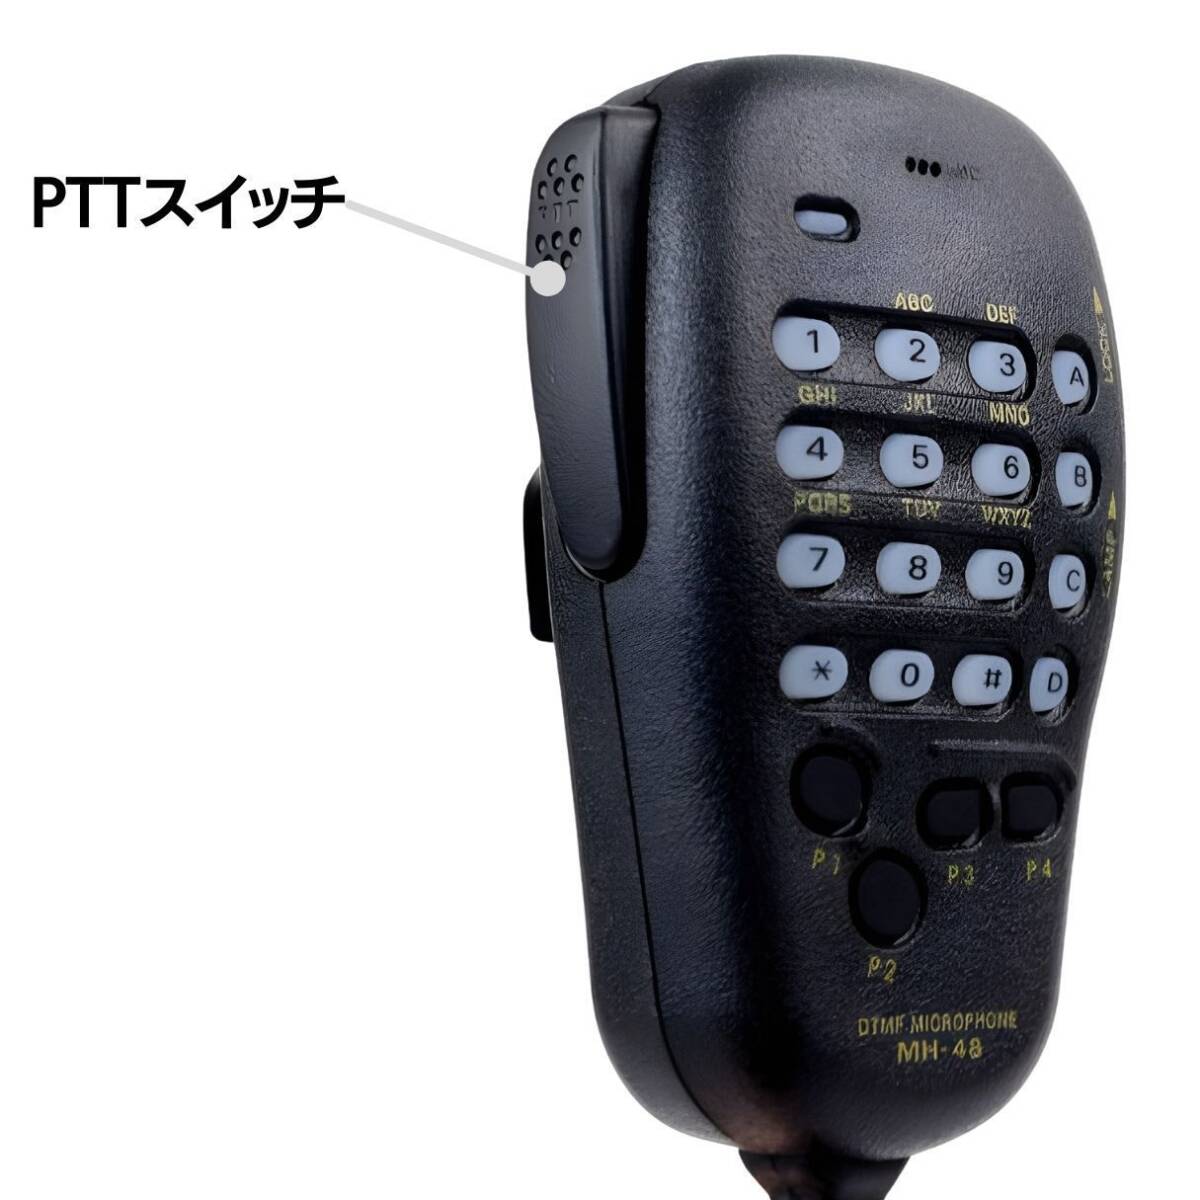  in stock Mike hand Mike Yaesu in-vehicle DTMF 48A6J Mike wireless 7800R MH-48A6J FT-8800 FT-8900R FTM-400D FTM-350A FT-7800